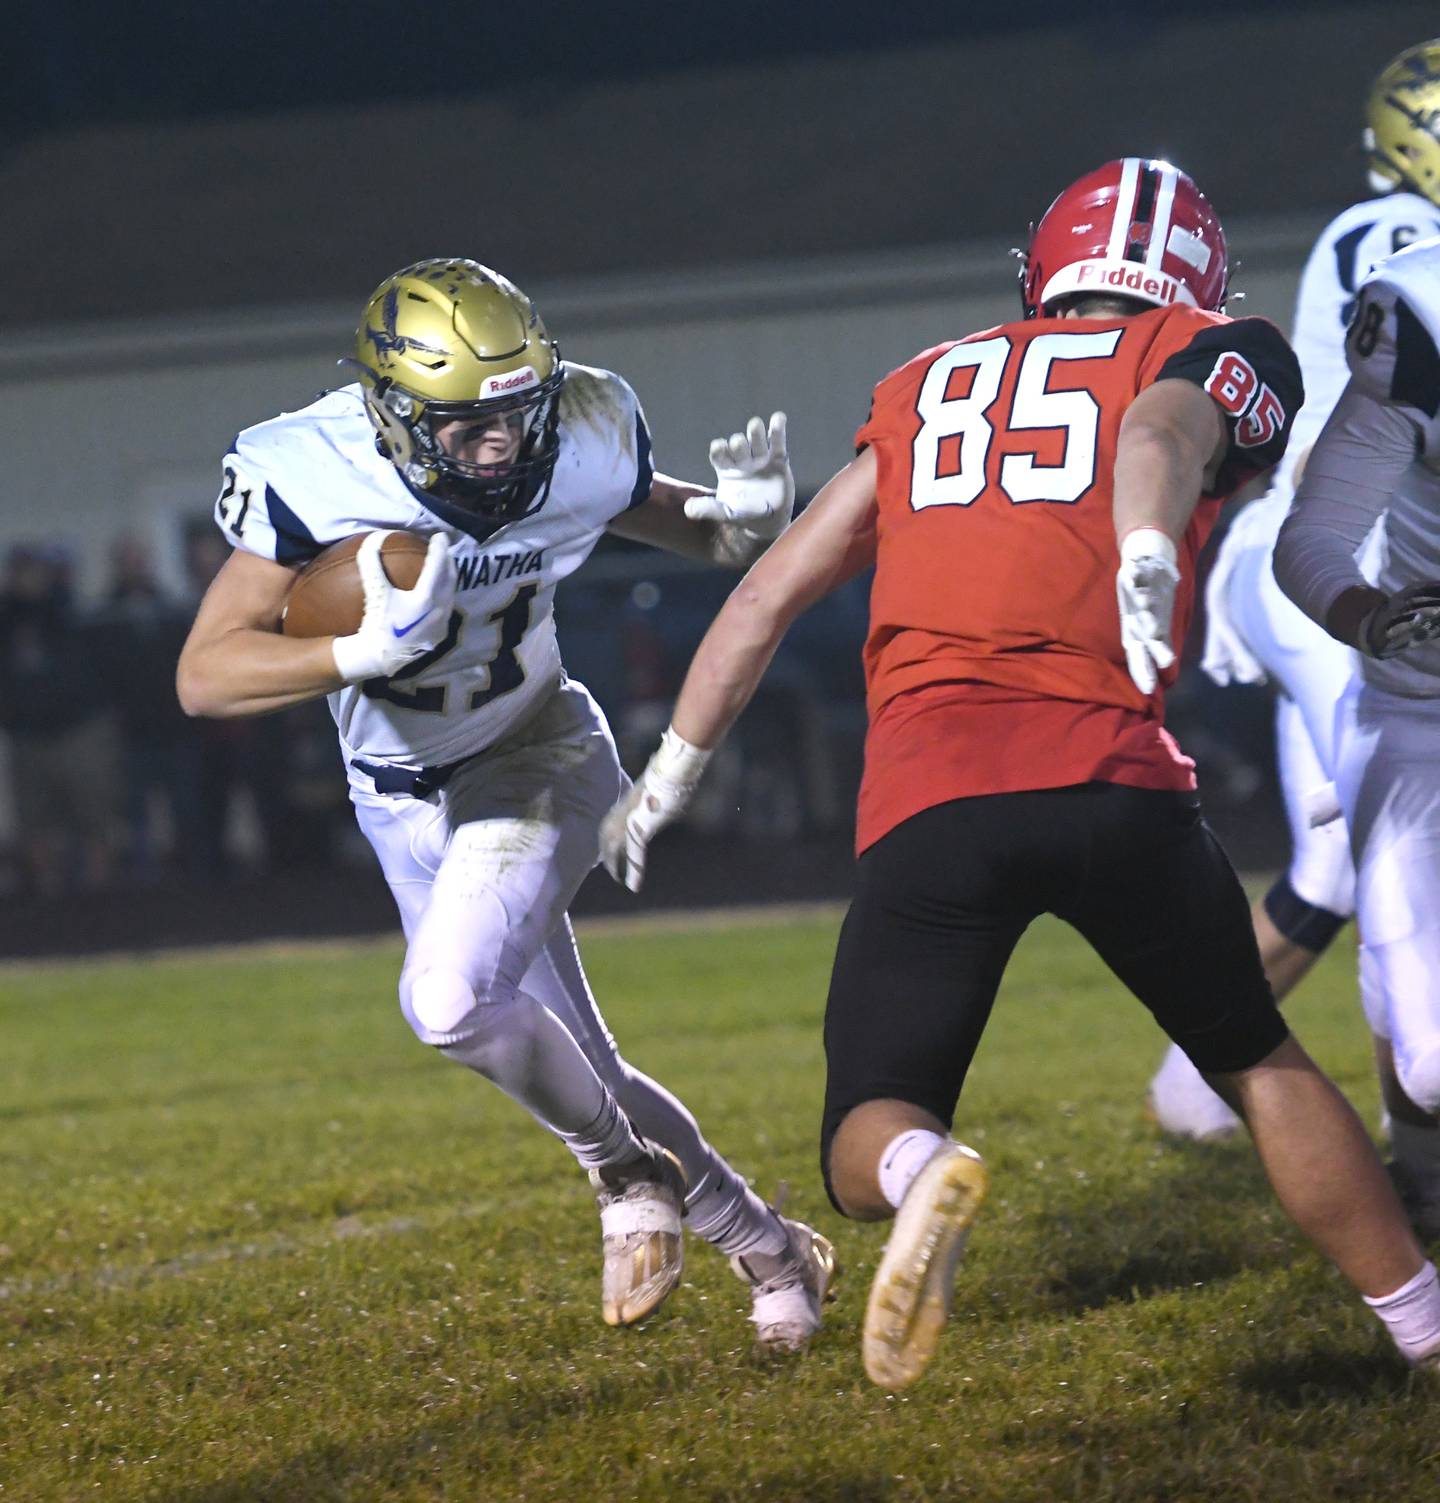 Hiawatha's Cole Brantley looks to avoid Amboy's Brennan Blaine during Friday. Sept 30 action in Amboy.